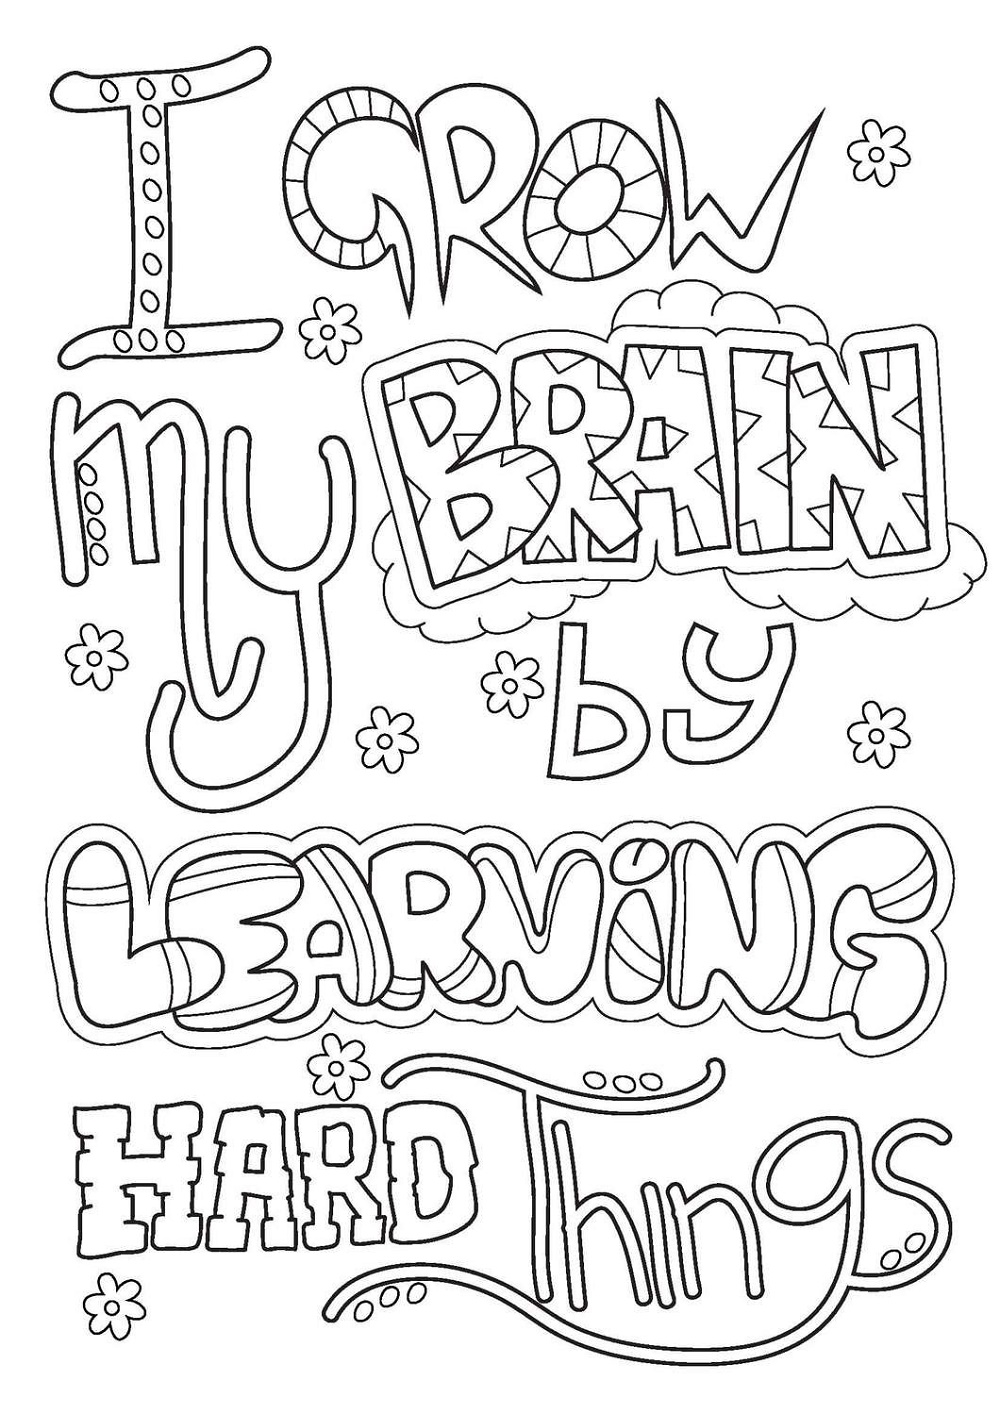 Growth Mindset Coloring Pages Printable